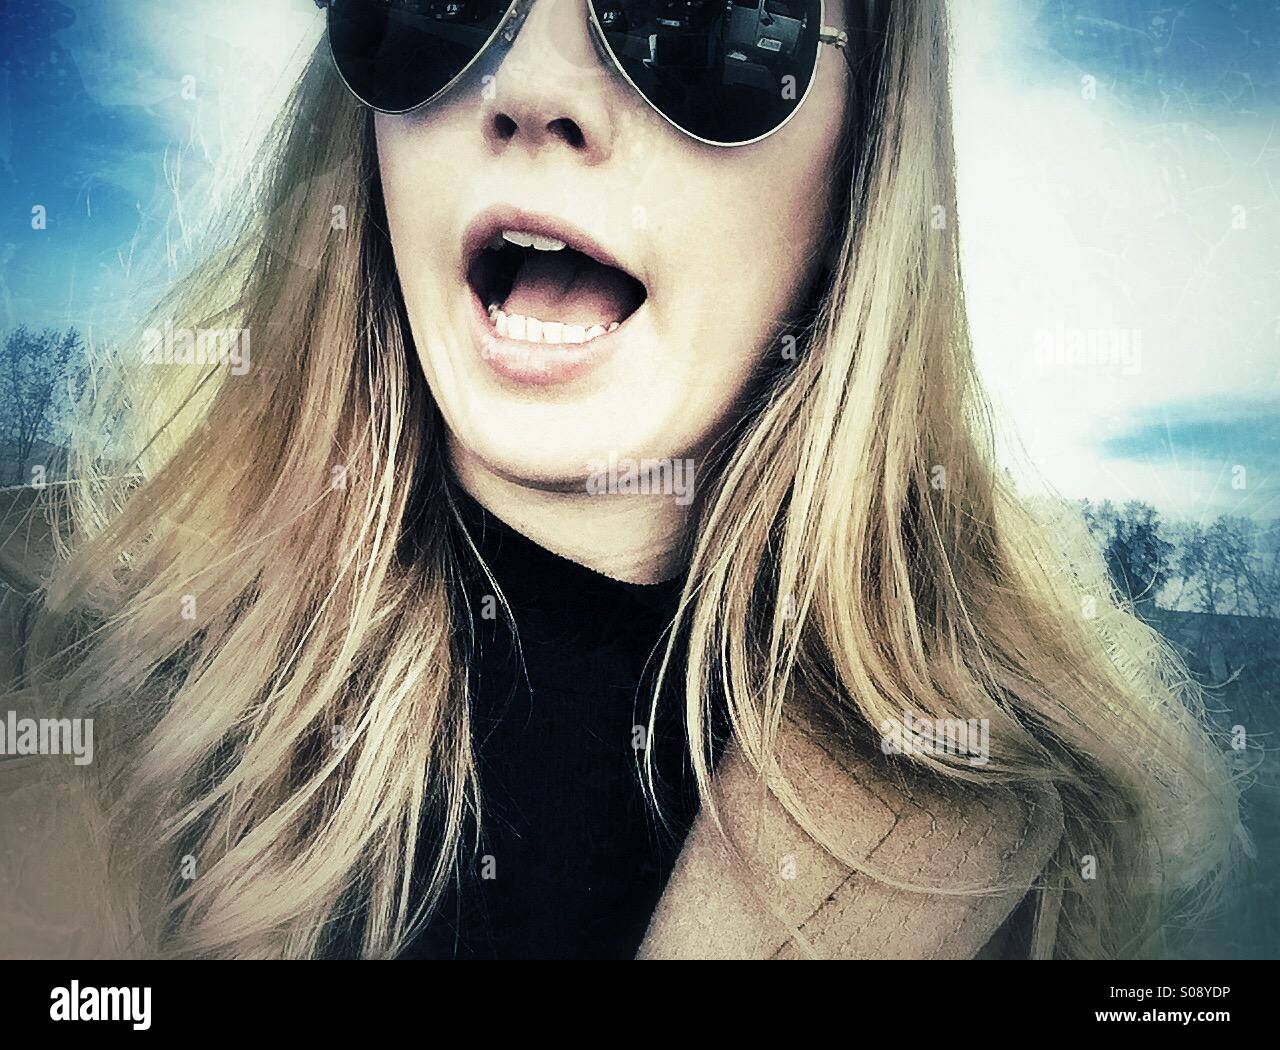 Young woman with blond hair and sunglasses shouting Stock Photo